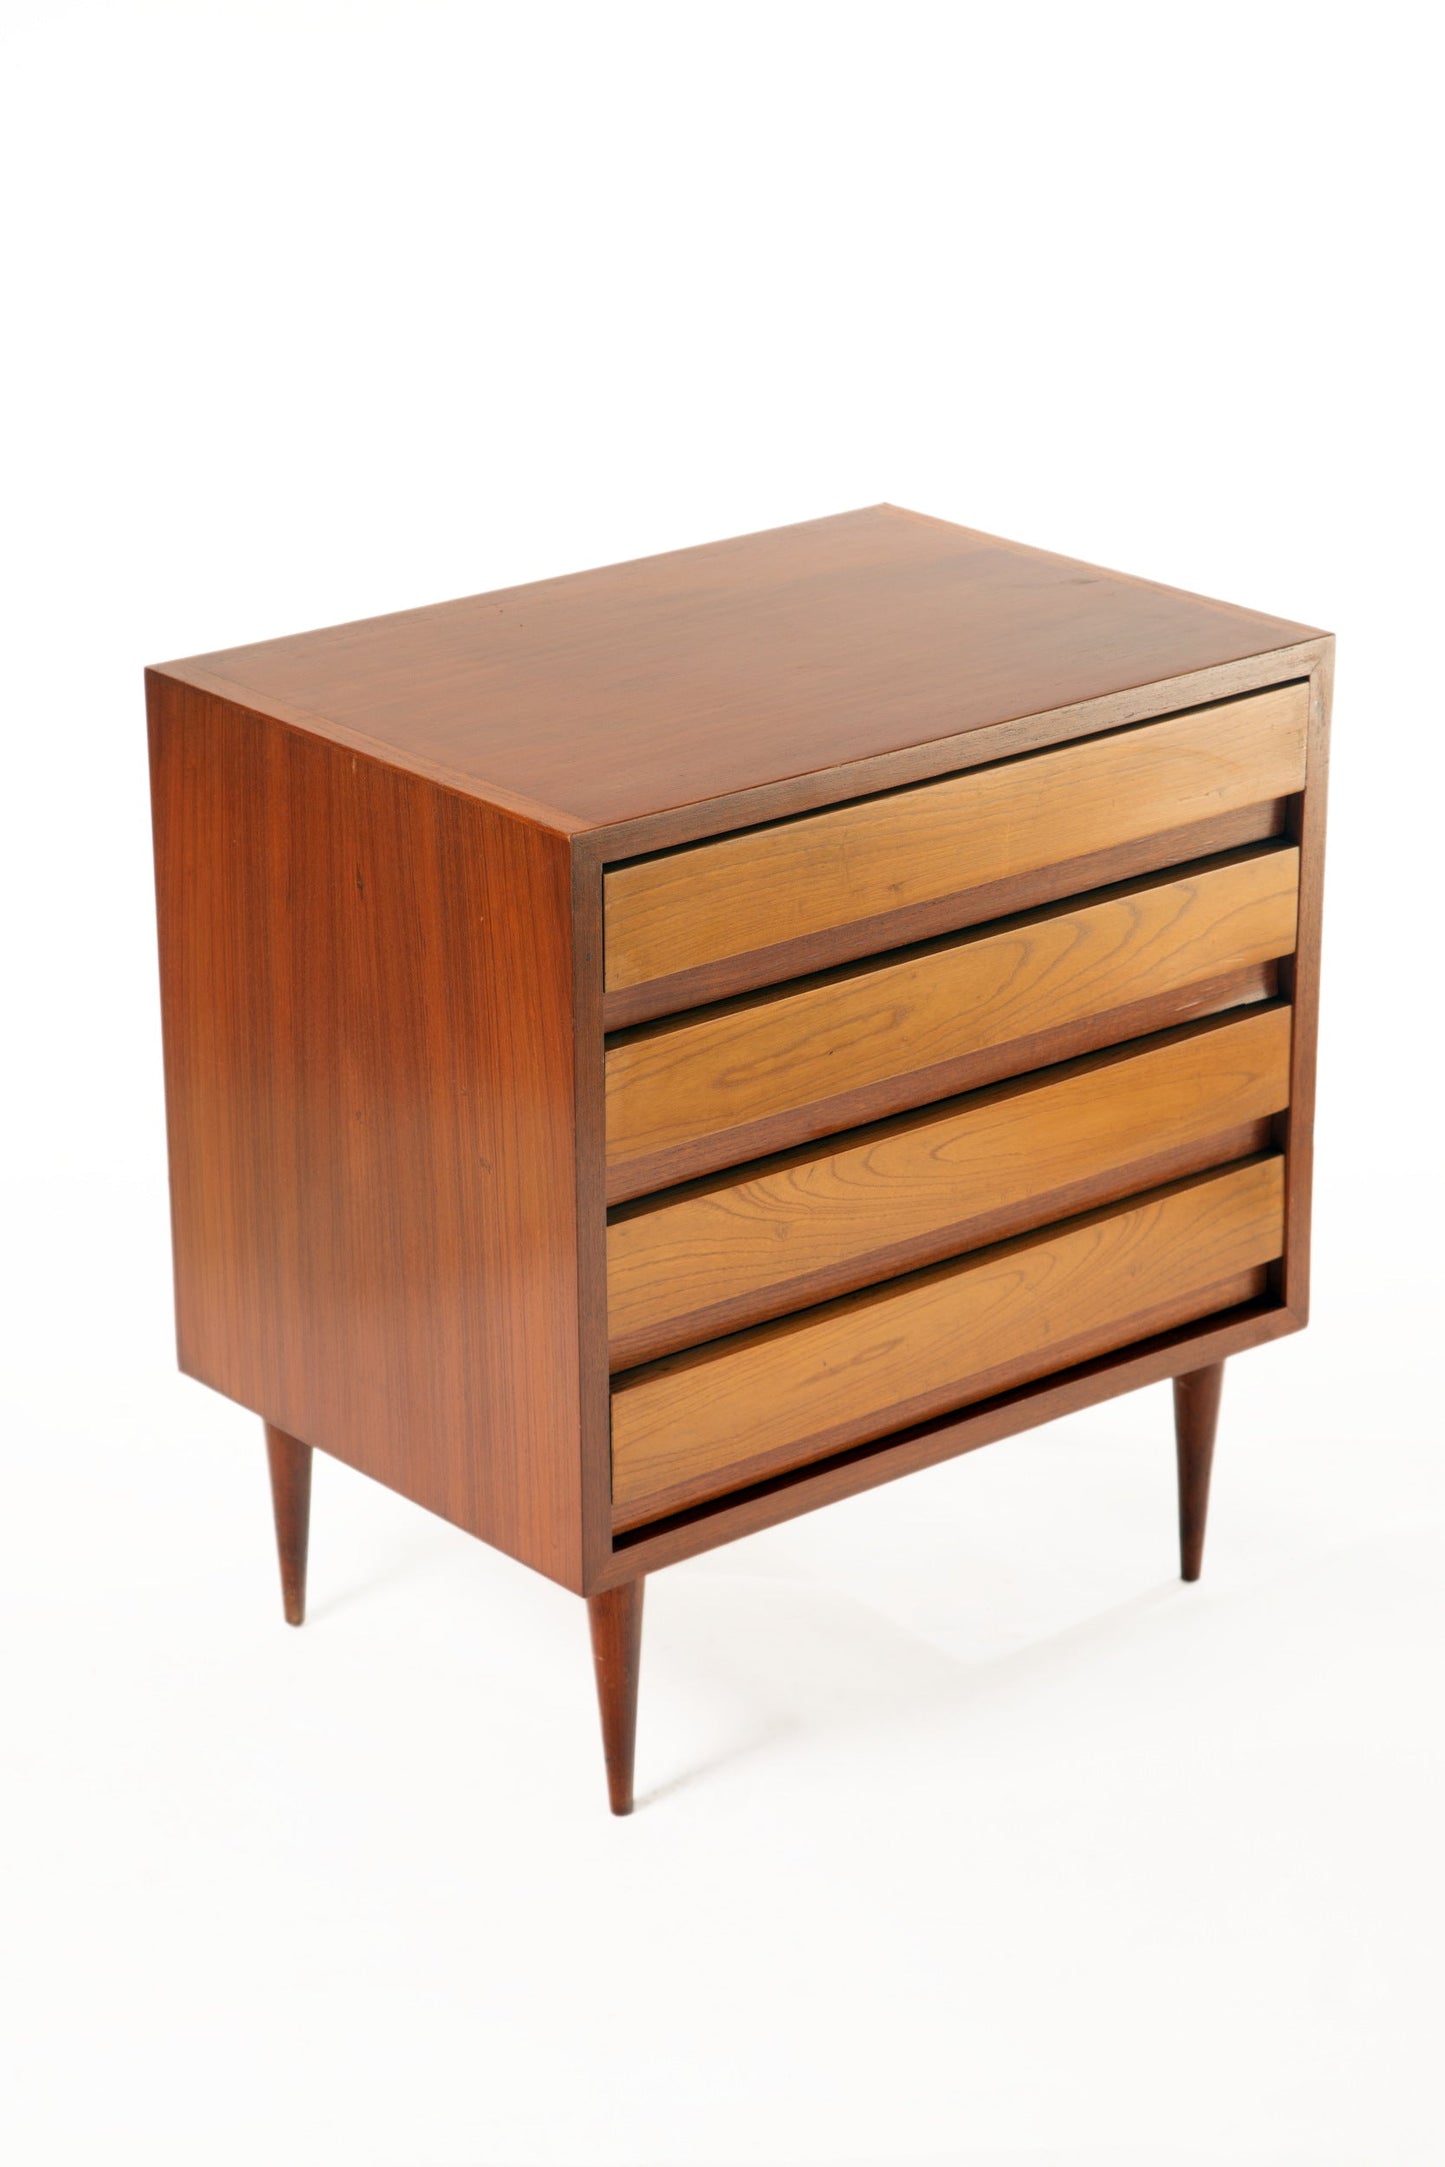 Small teak chest of drawers from the 70s